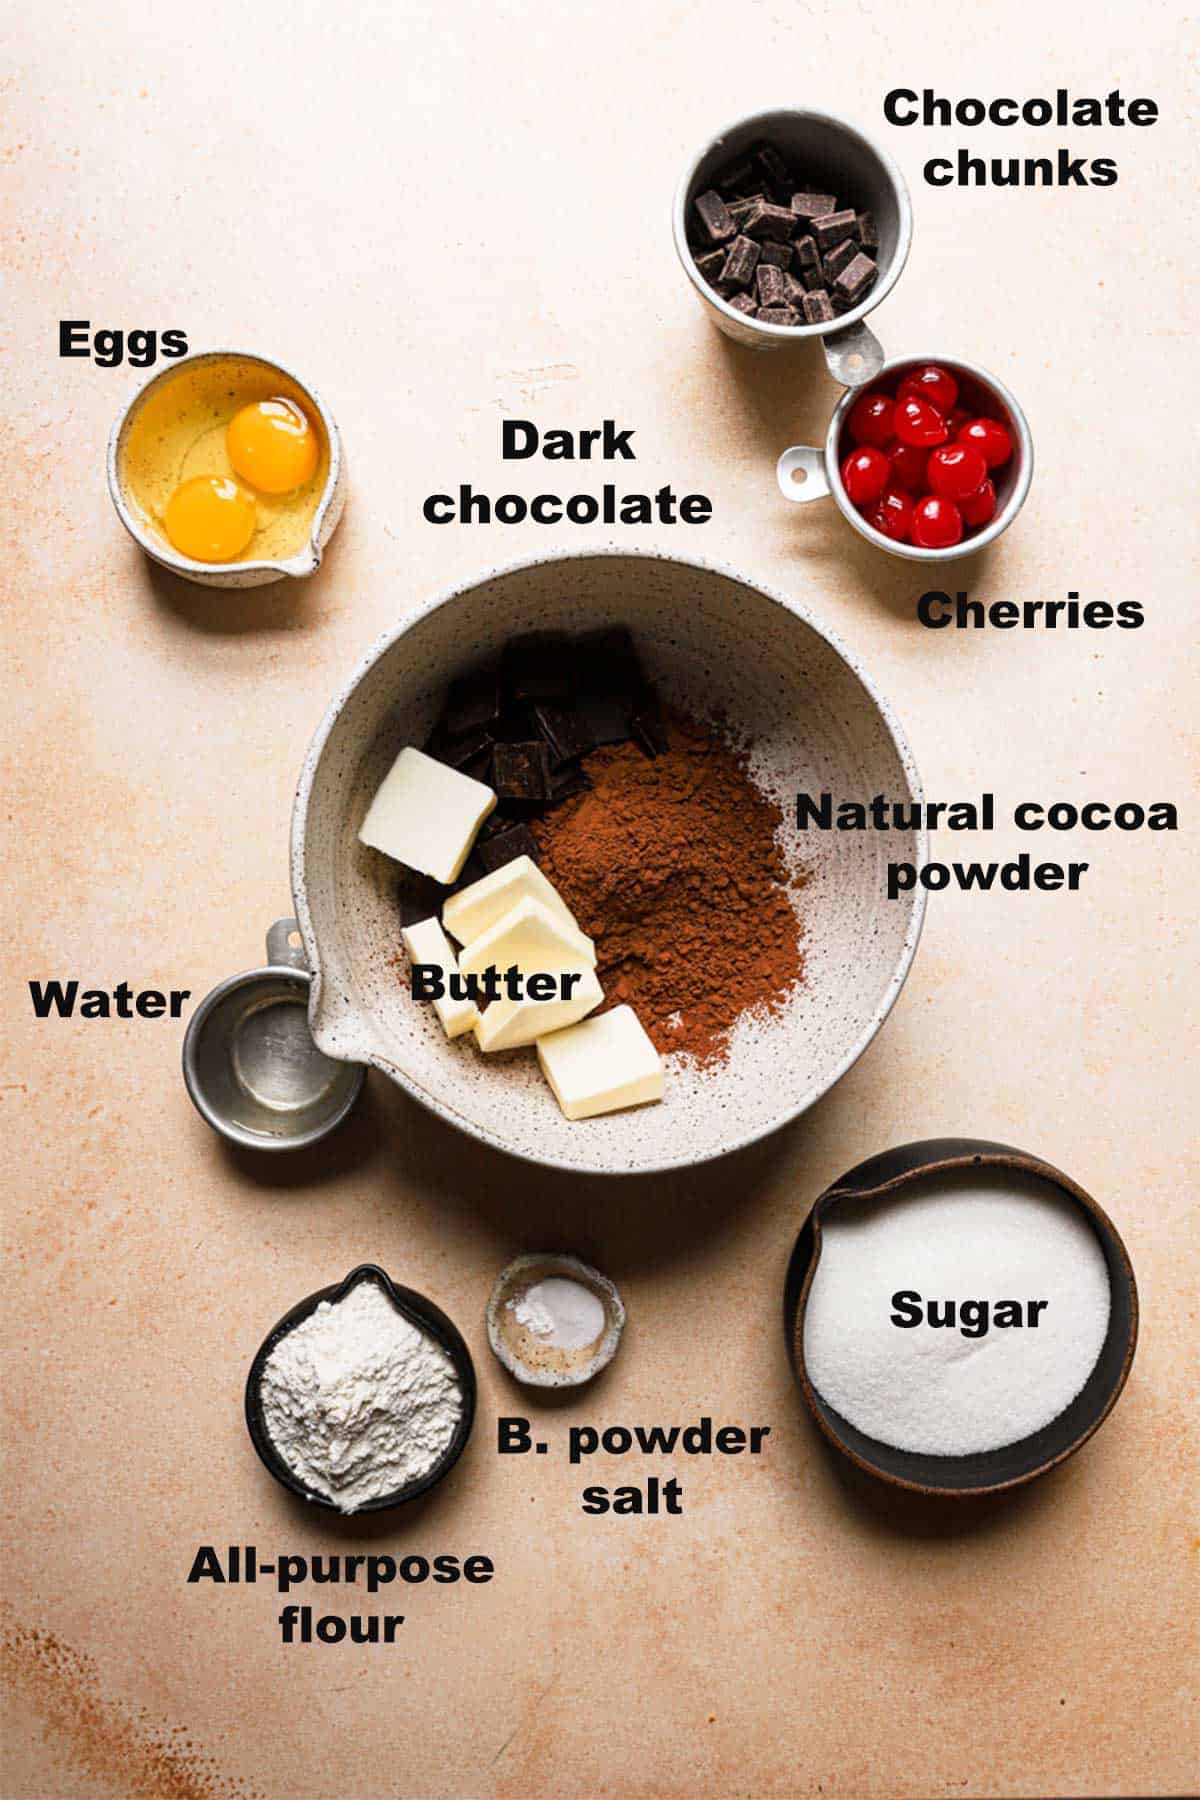 Ingredients to make chocolate and cherry bars.